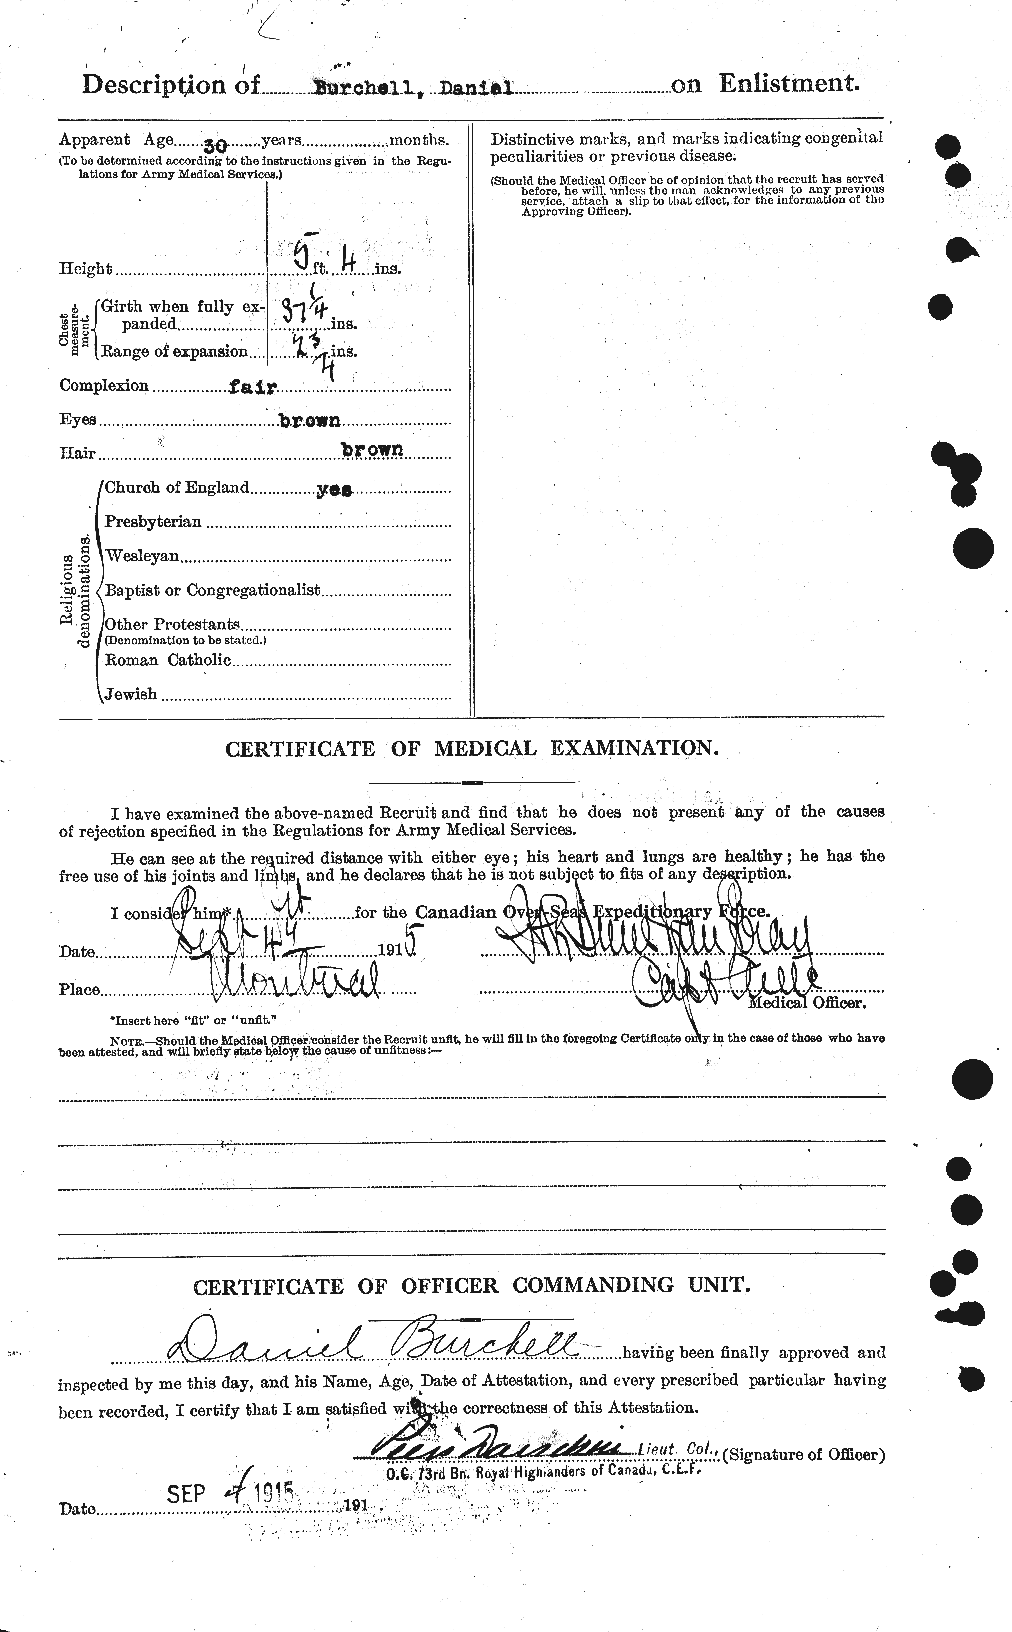 Personnel Records of the First World War - CEF 273142b